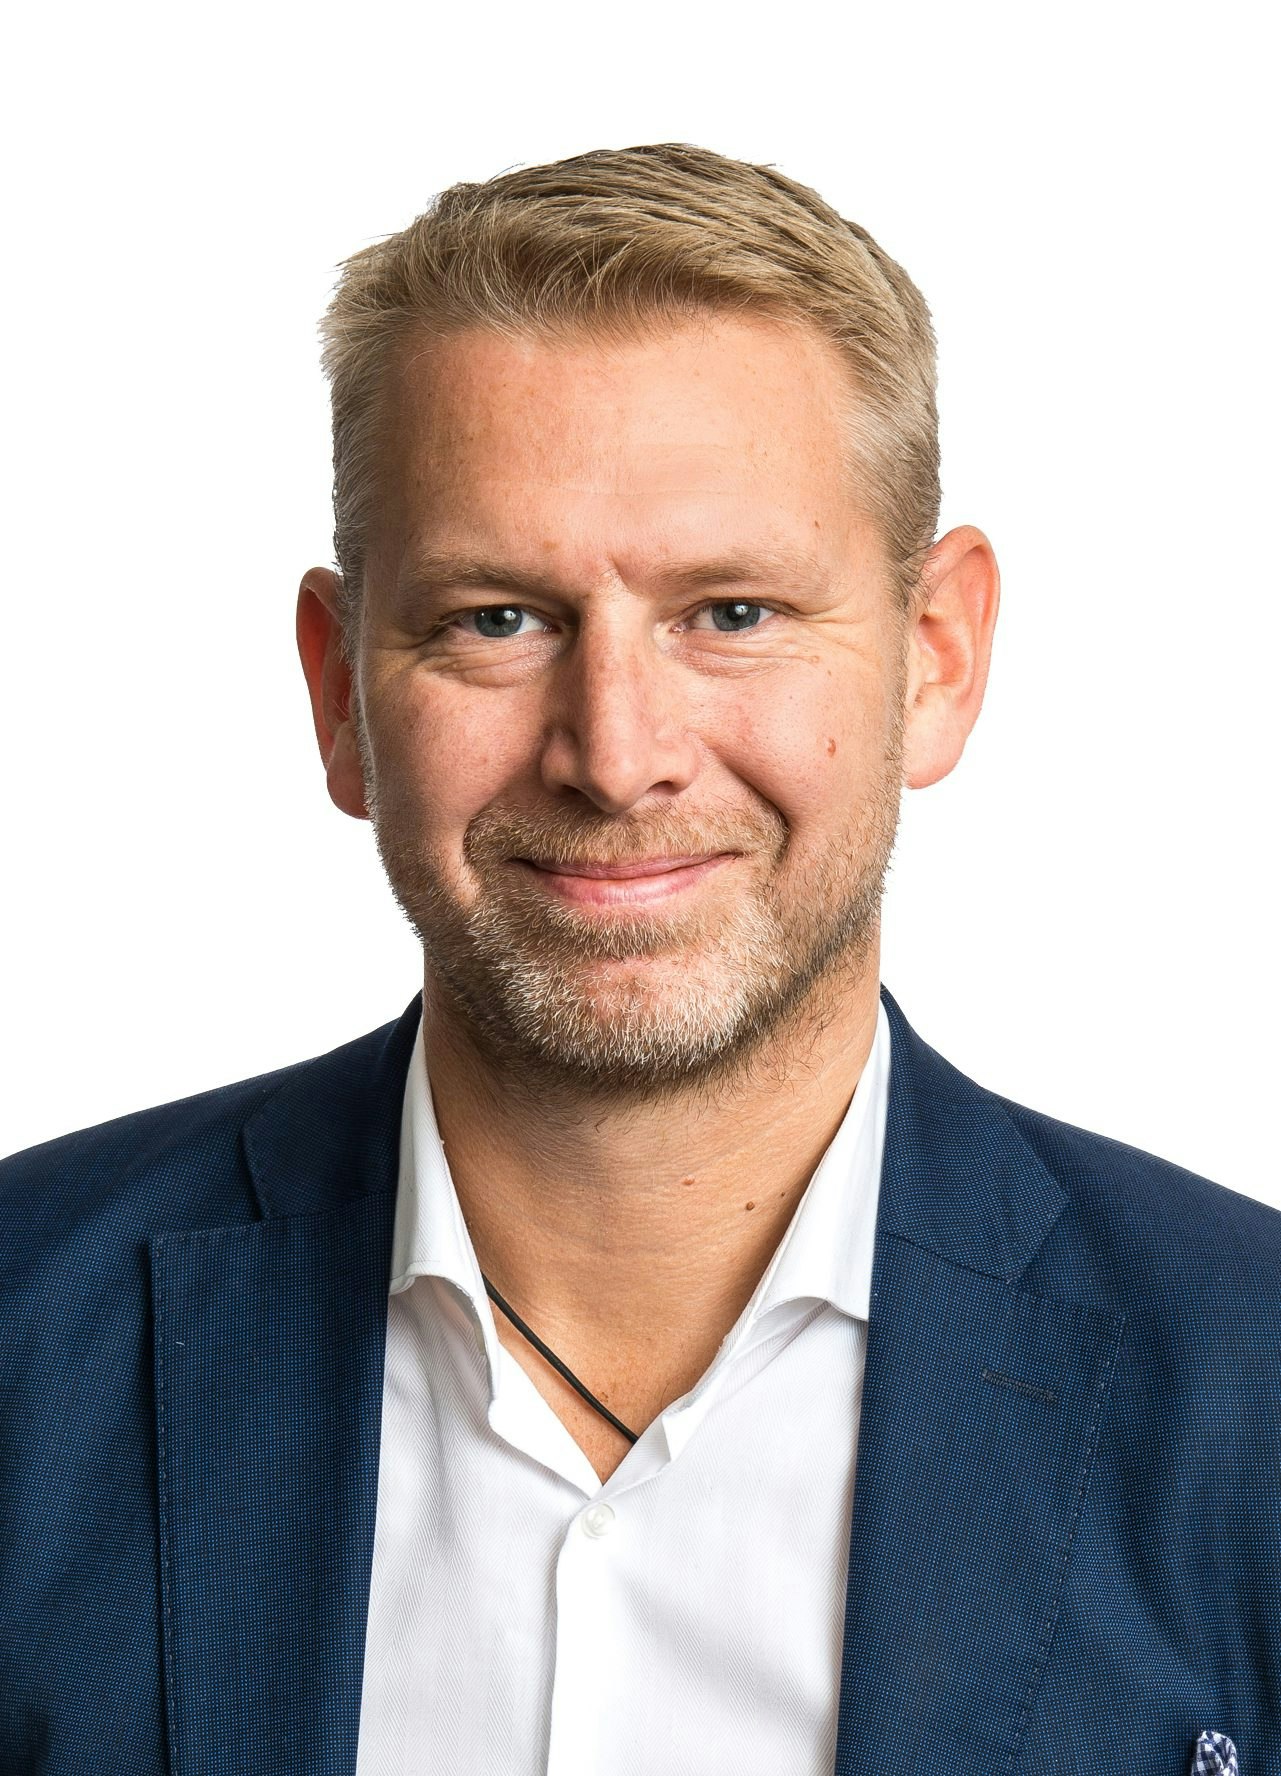 Headshot of Peter Carlsson, the Chief Executive of Northvolt.